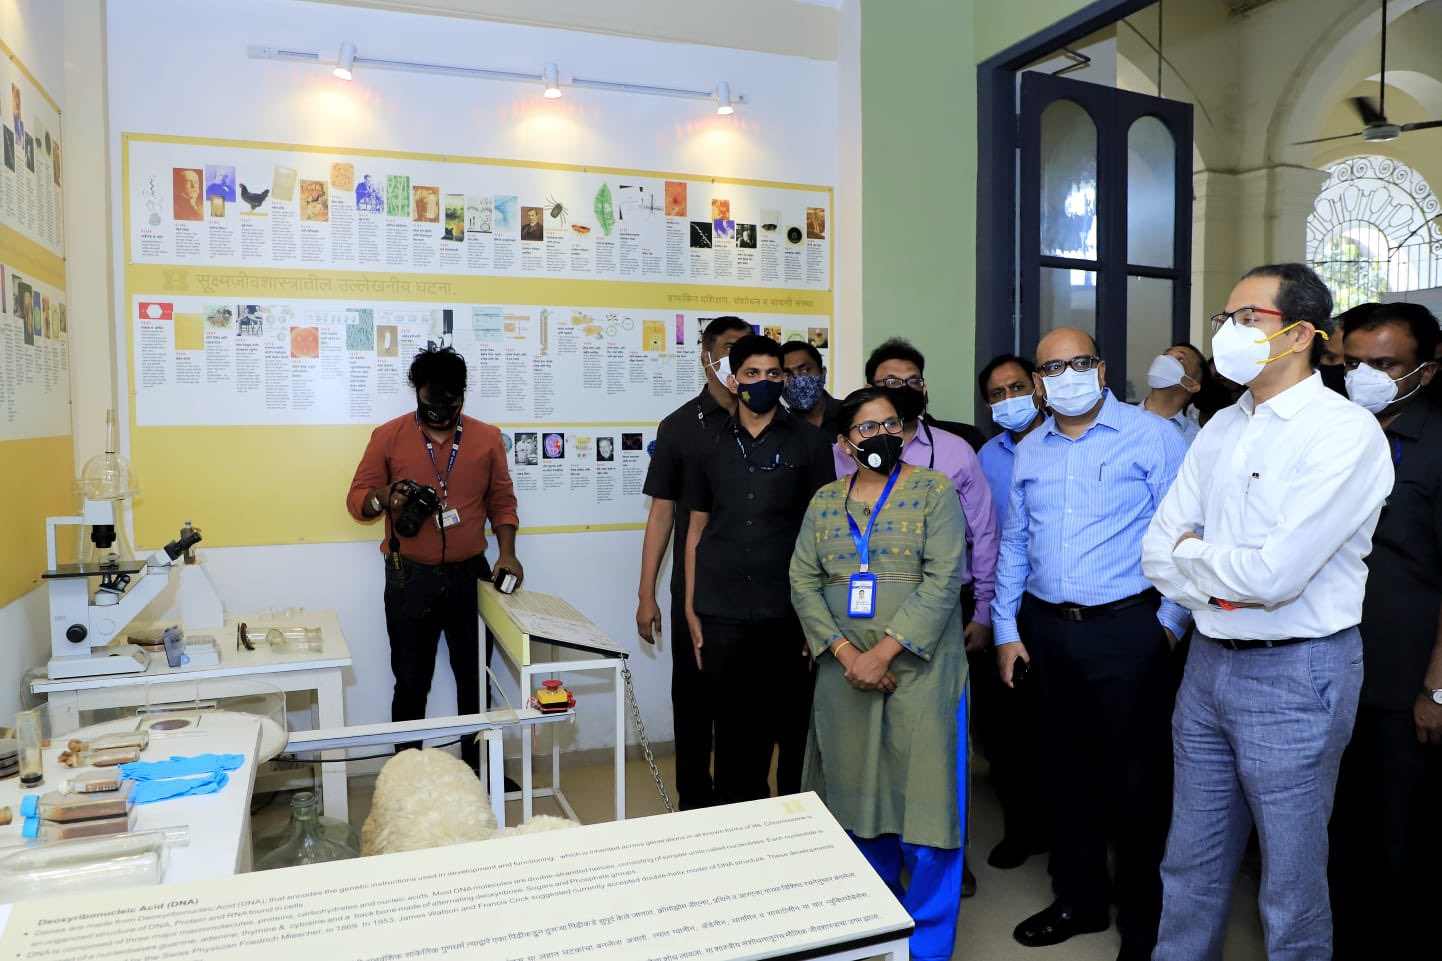 Chief Minister Uddhav Thackeray inspects Halfkin Institute, gives important information about Corona vaccine